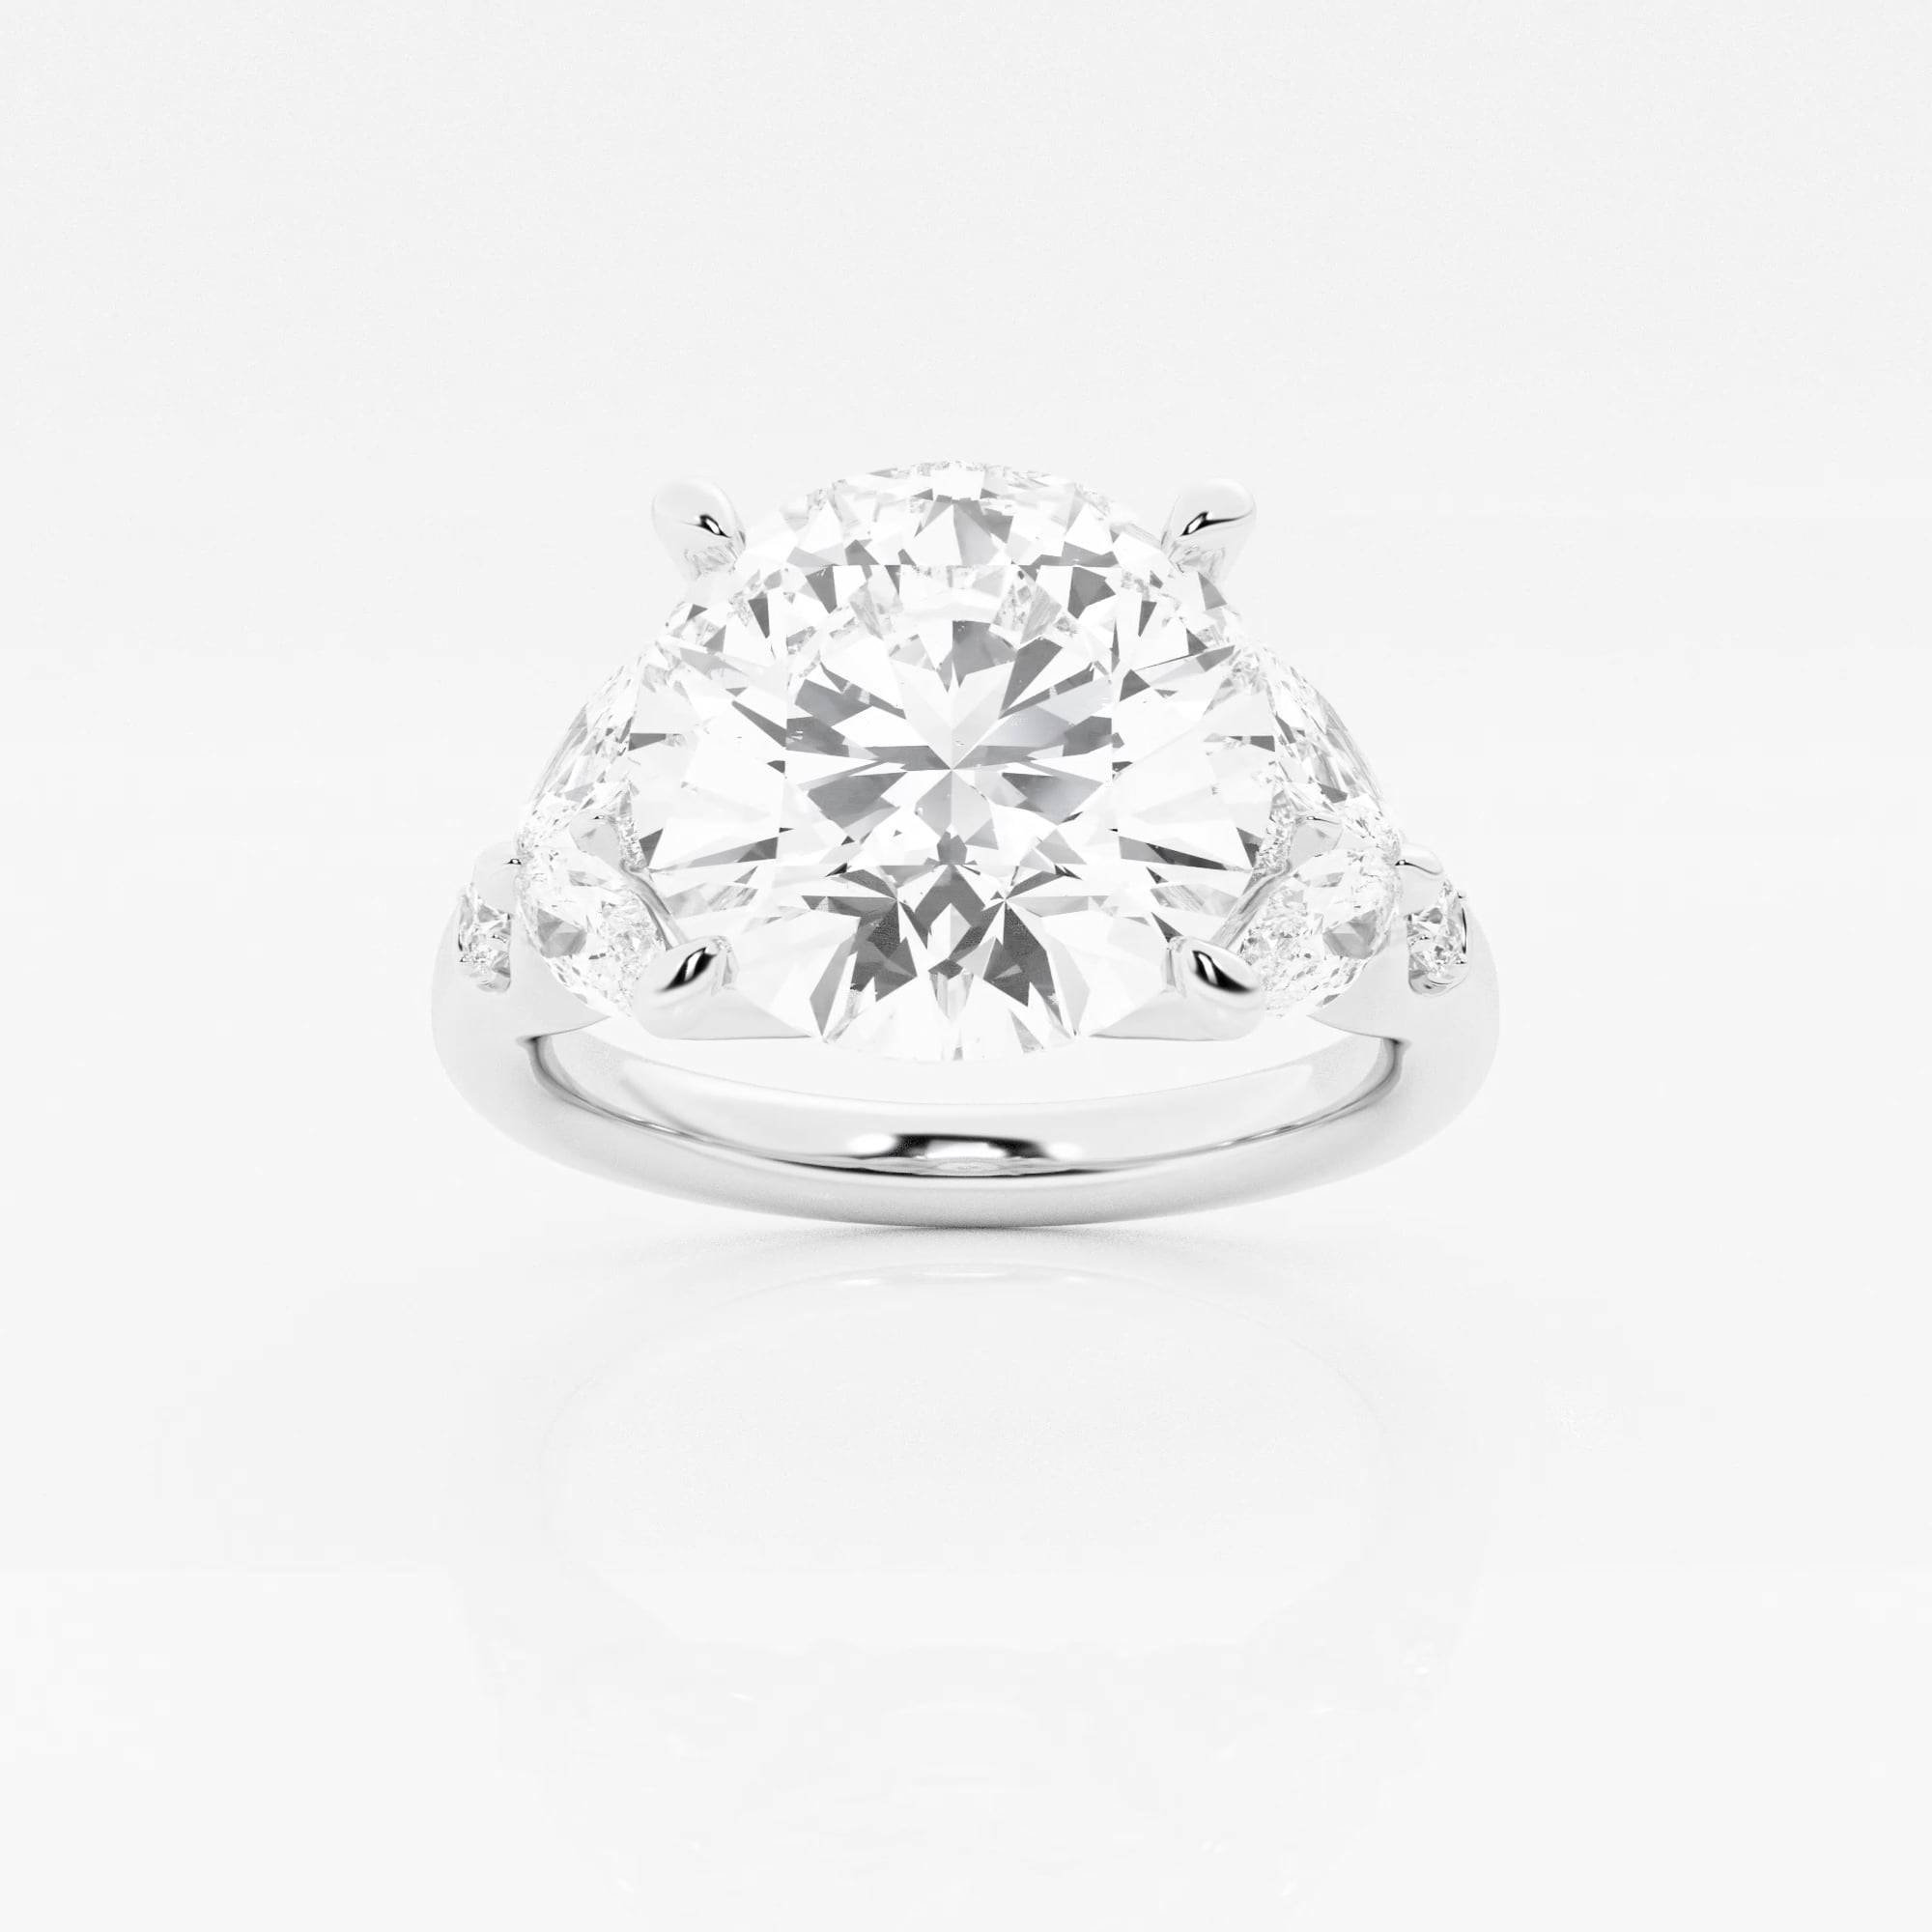 product video for Badgley Mischka Near-Colorless 5 5/8 ctw Round Lab Grown Diamond Engagement Ring